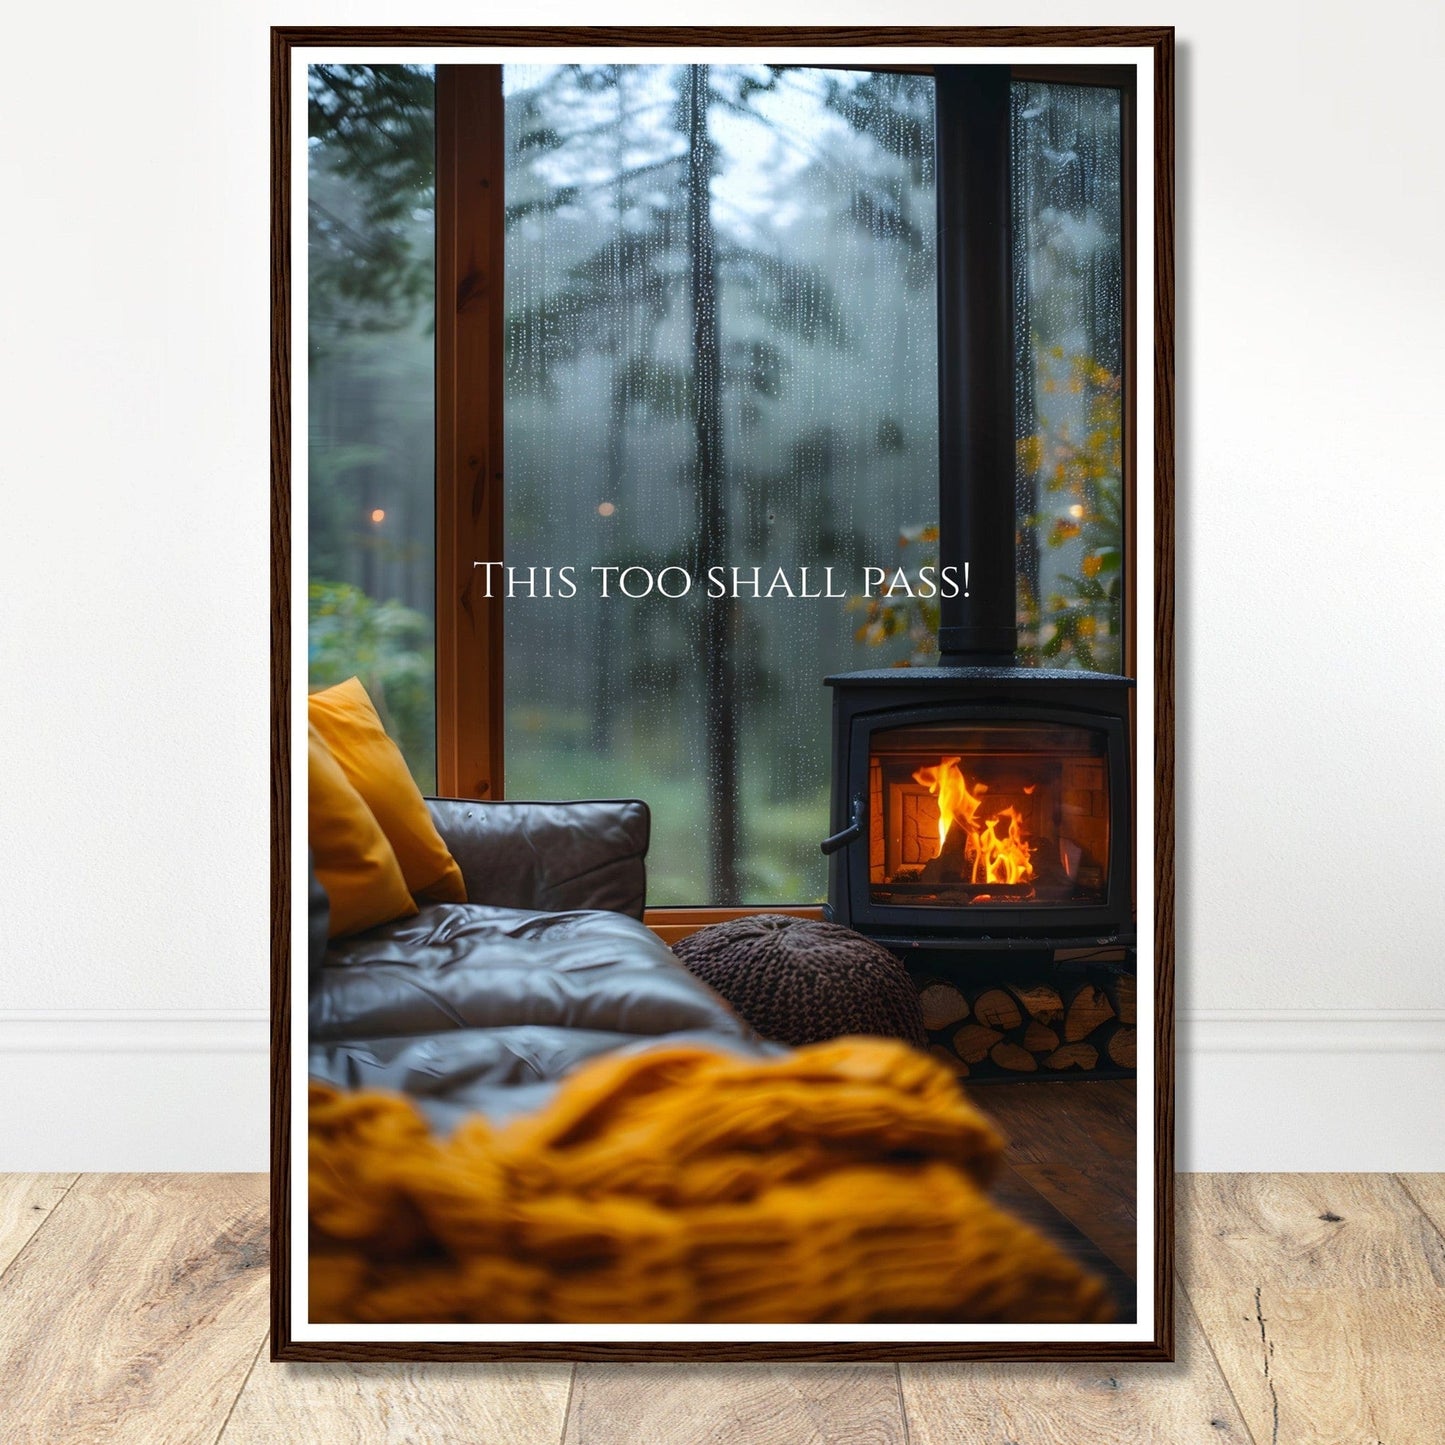 Coffee With My Father Print Material 60x90 cm / 24x36″ / Framed / Dark wood frame This Too Shall Pass - Custom Art